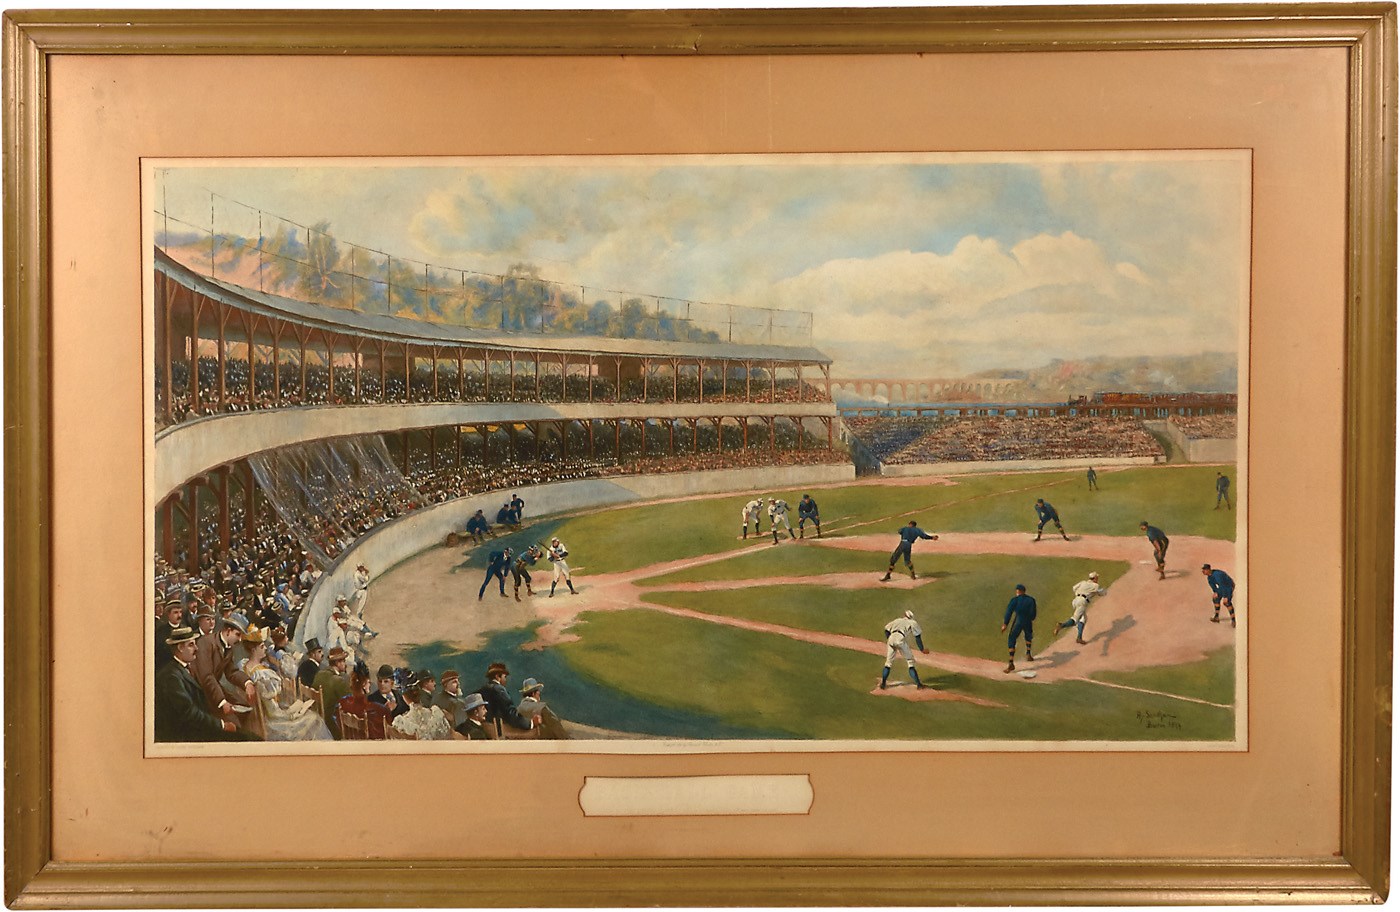 Early Baseball - 1894 Temple Cup Photogravure by Henry Sandham - Rare Handcolored Version